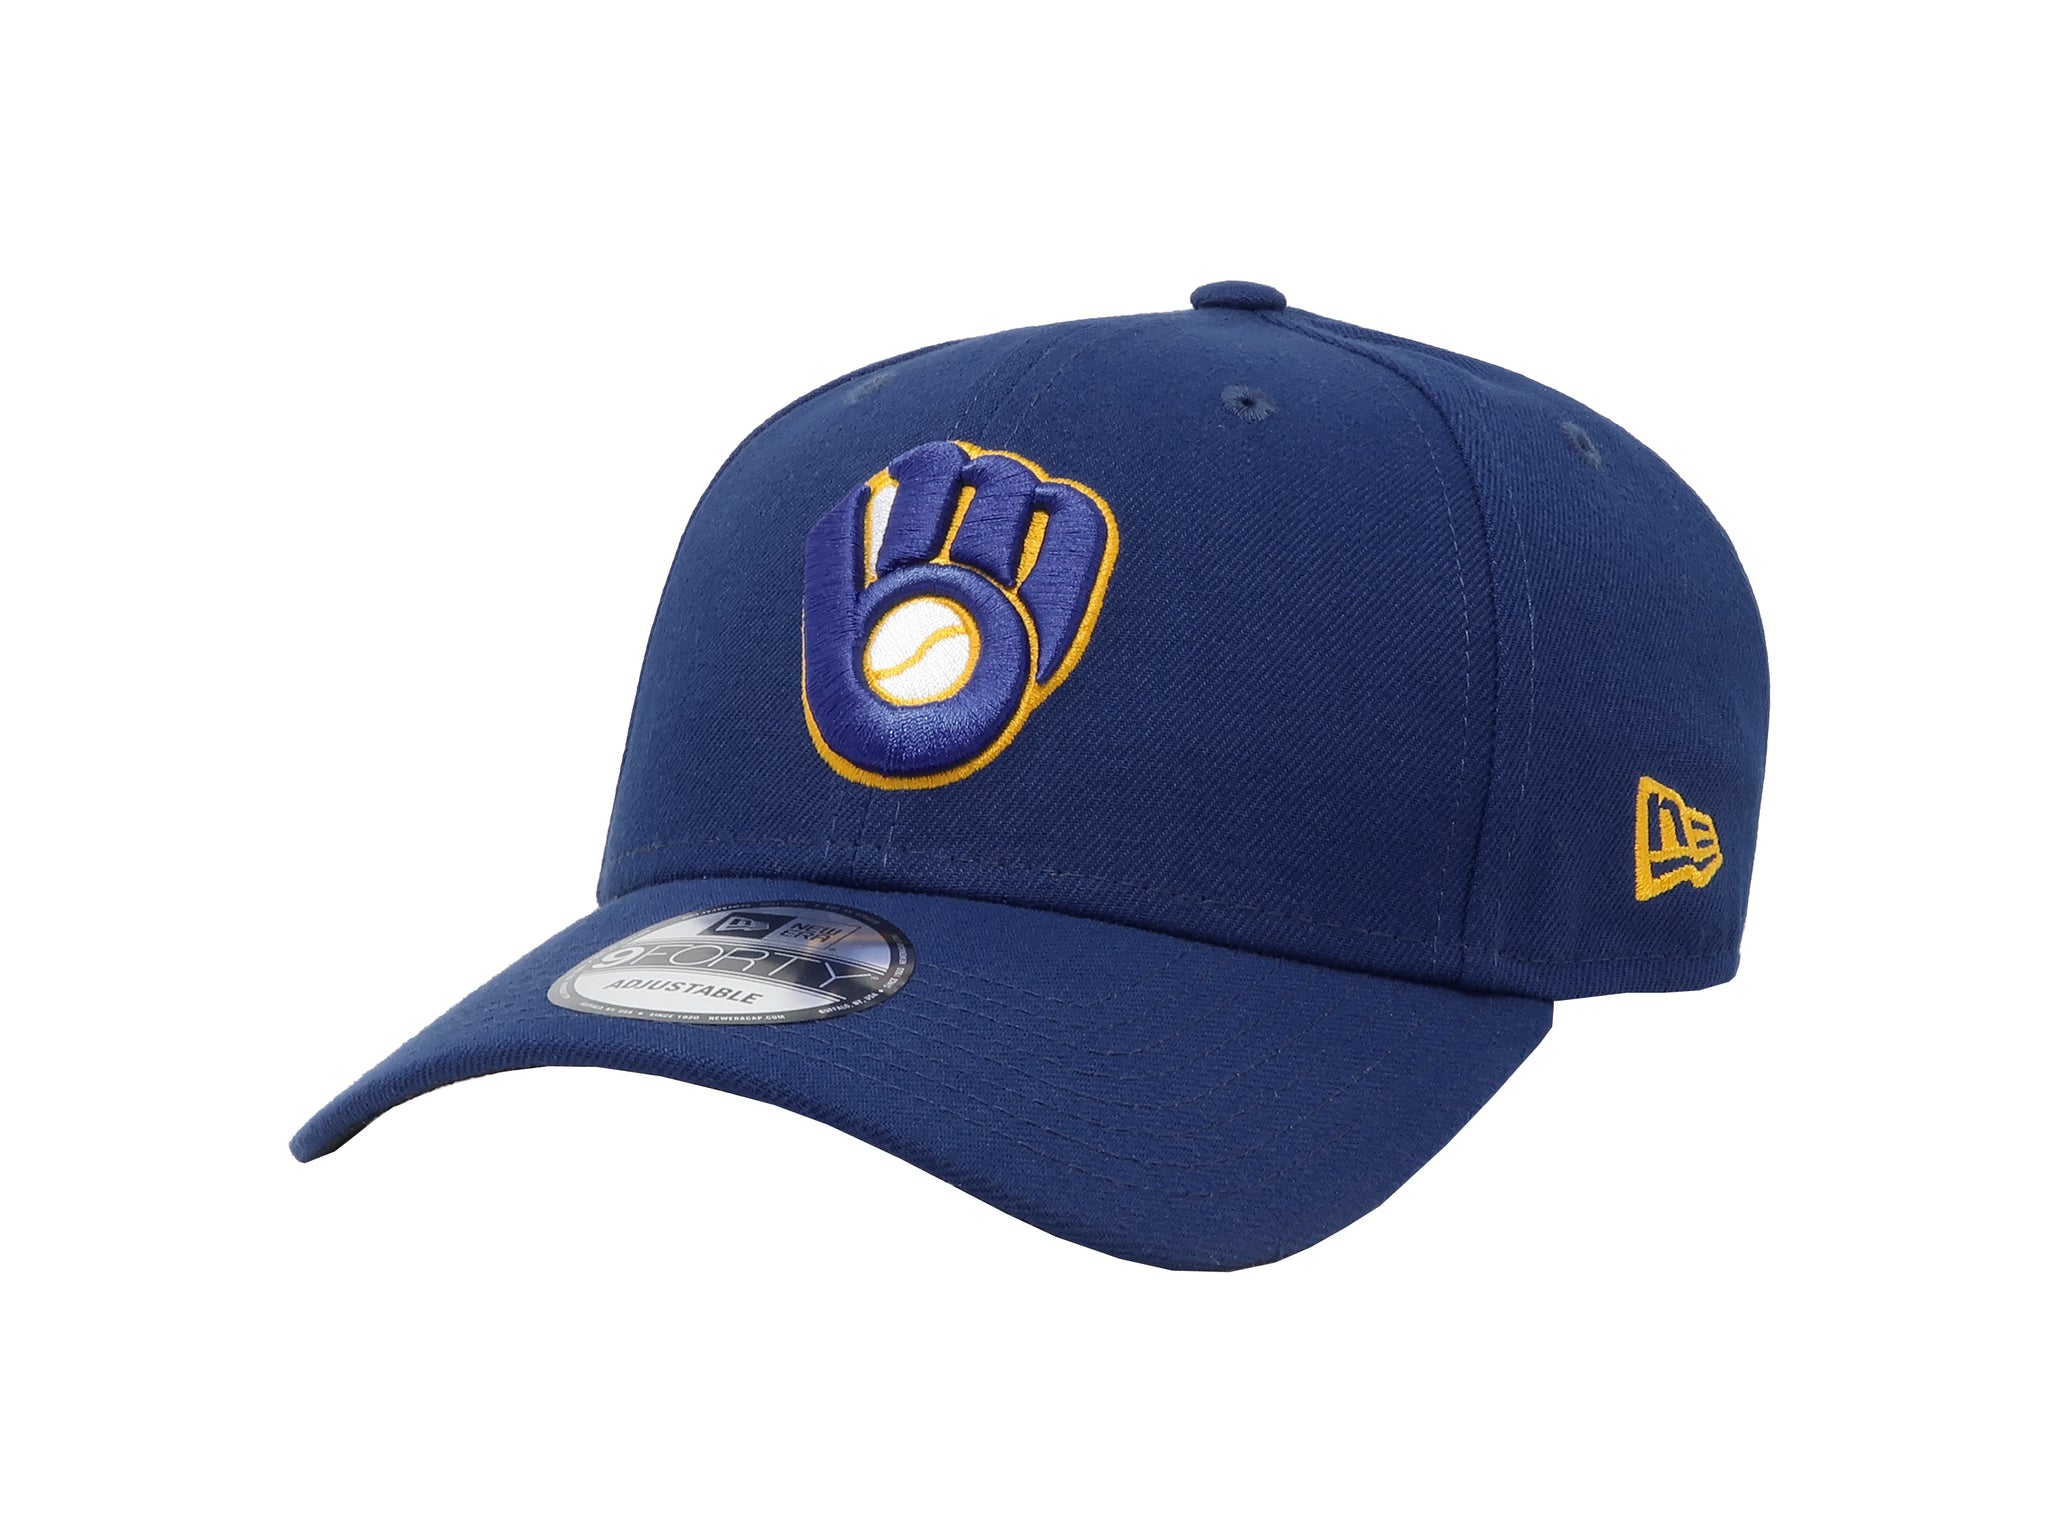 New Era 9Forty MLB Milwaukee Brewers The League "Glove" Royal Blue Adjustable Cap